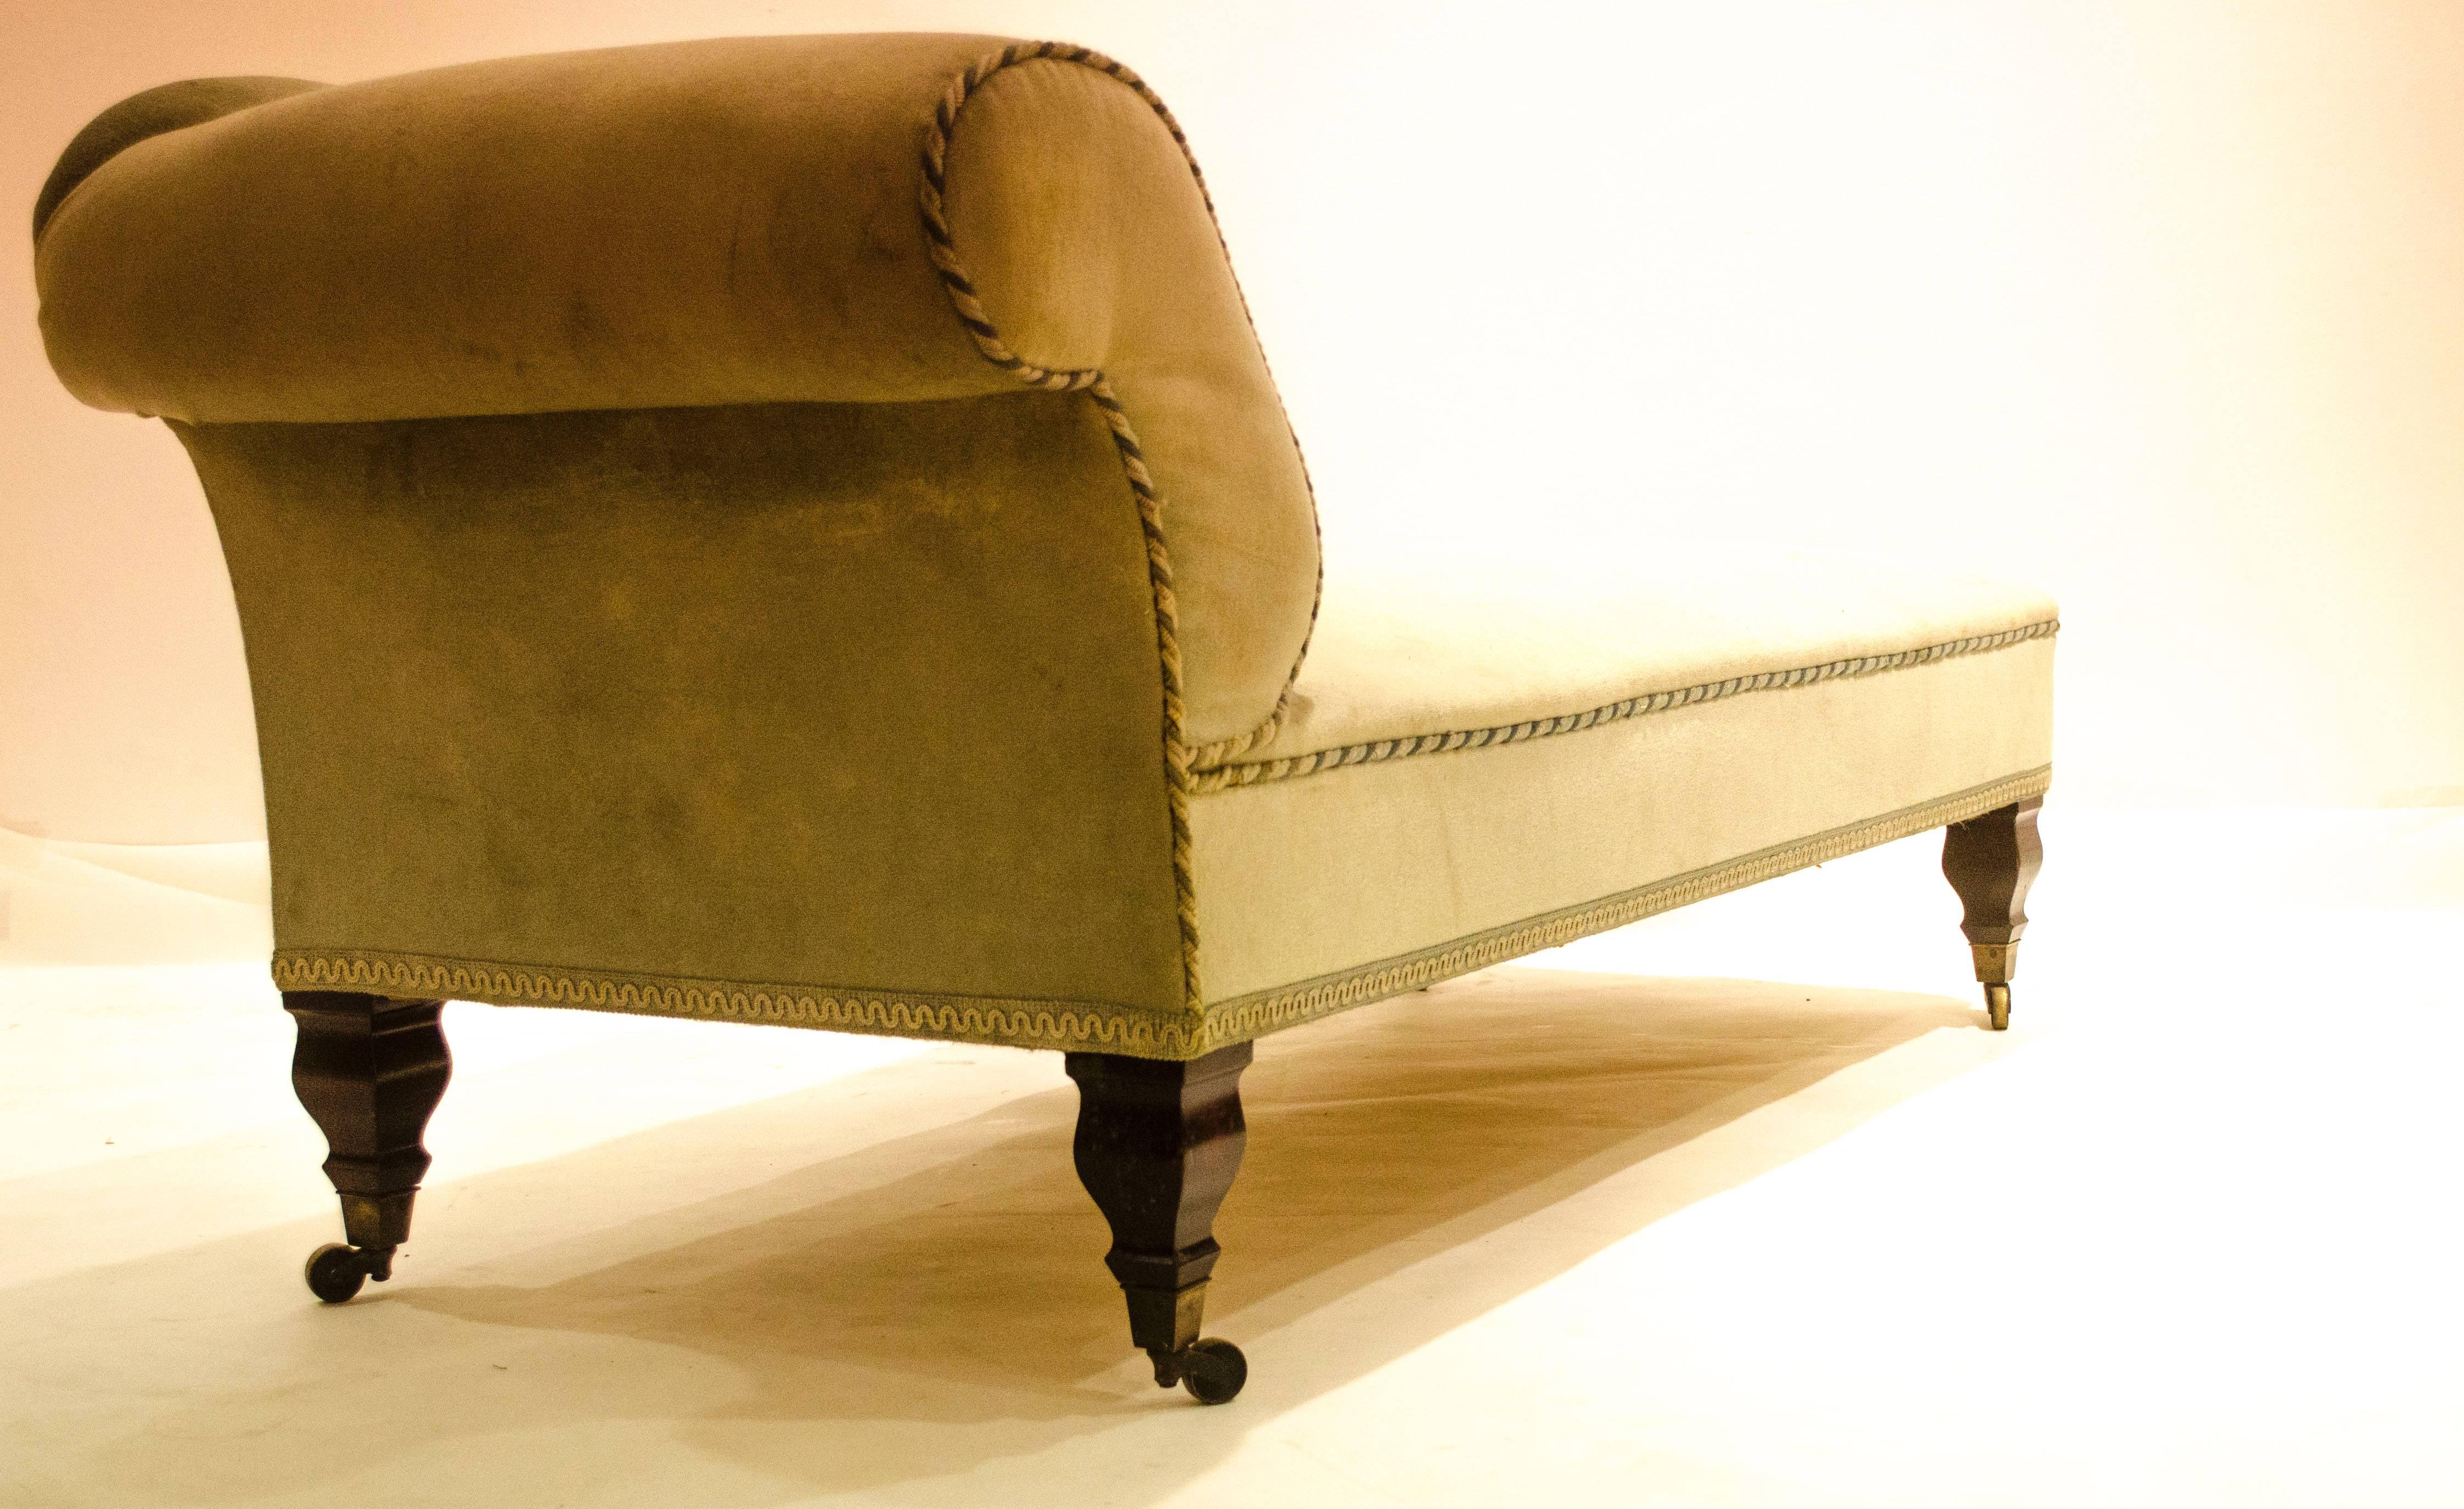 George Washington Jack for Morris and Co., a mahogany 'Saville' chaise longue, re-upholstered in green velour, on mahogany legs with brass casters.